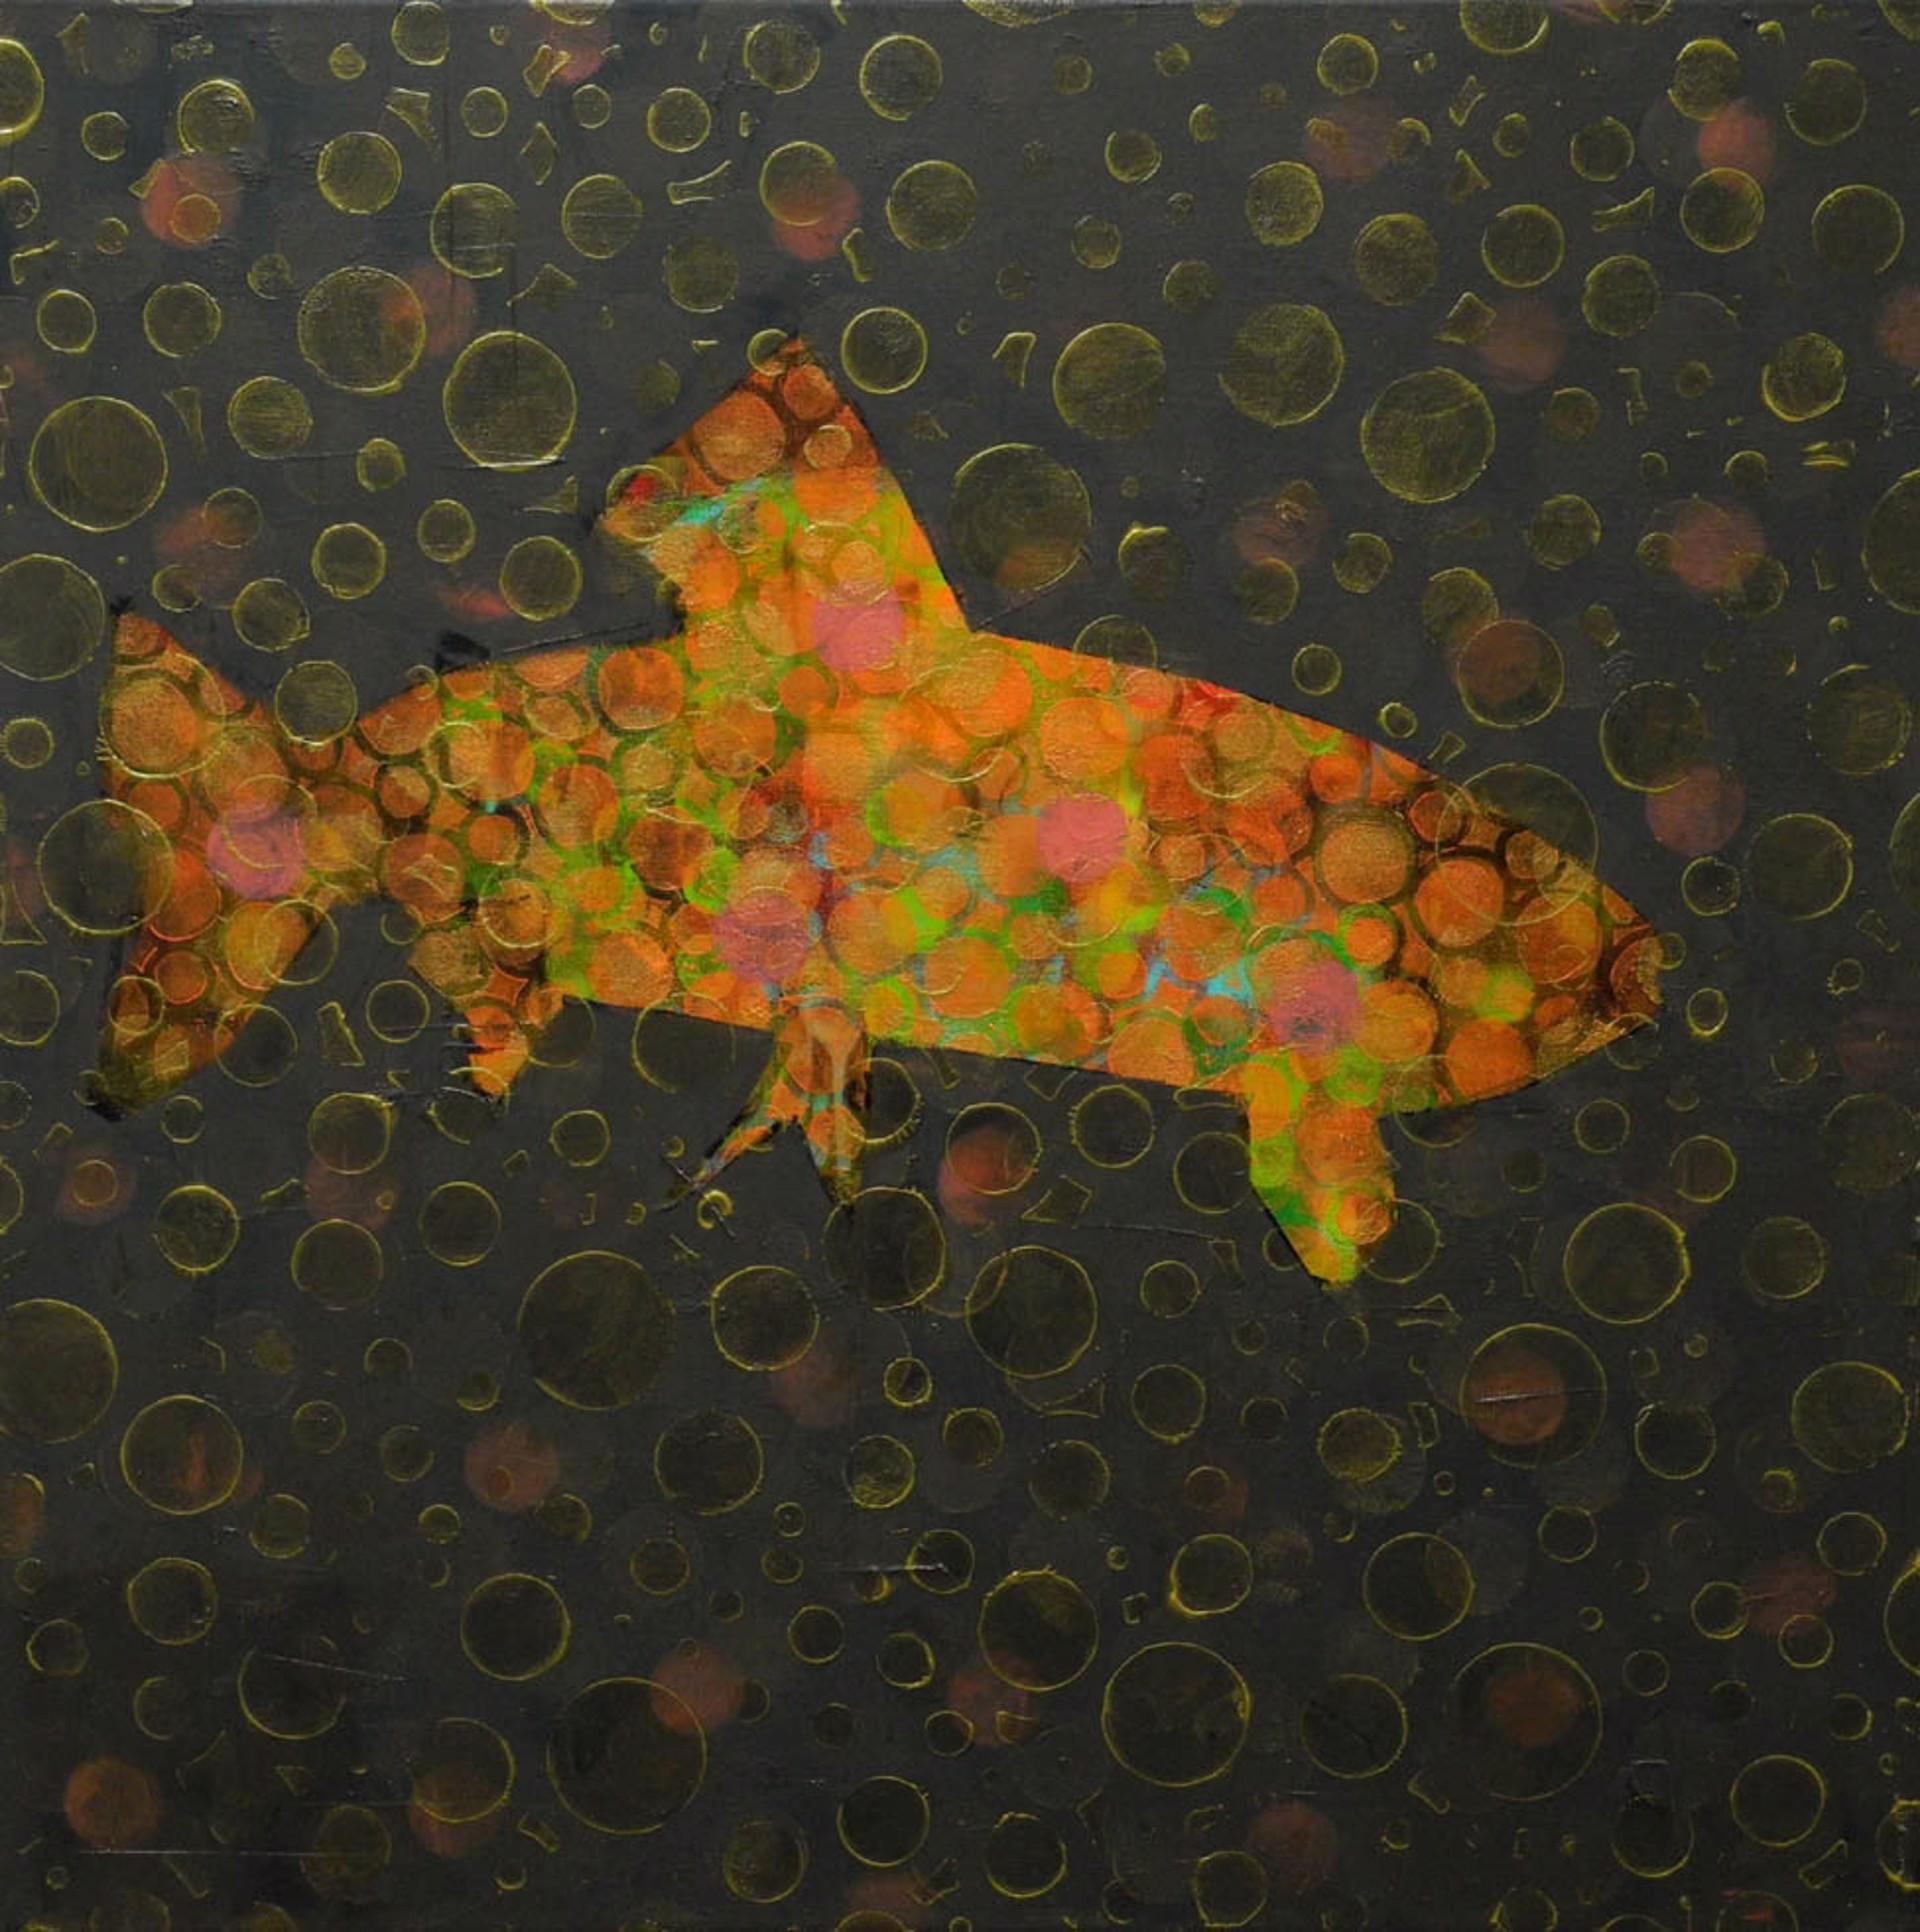 Trout Painting # 016-1369 by Les Thomas